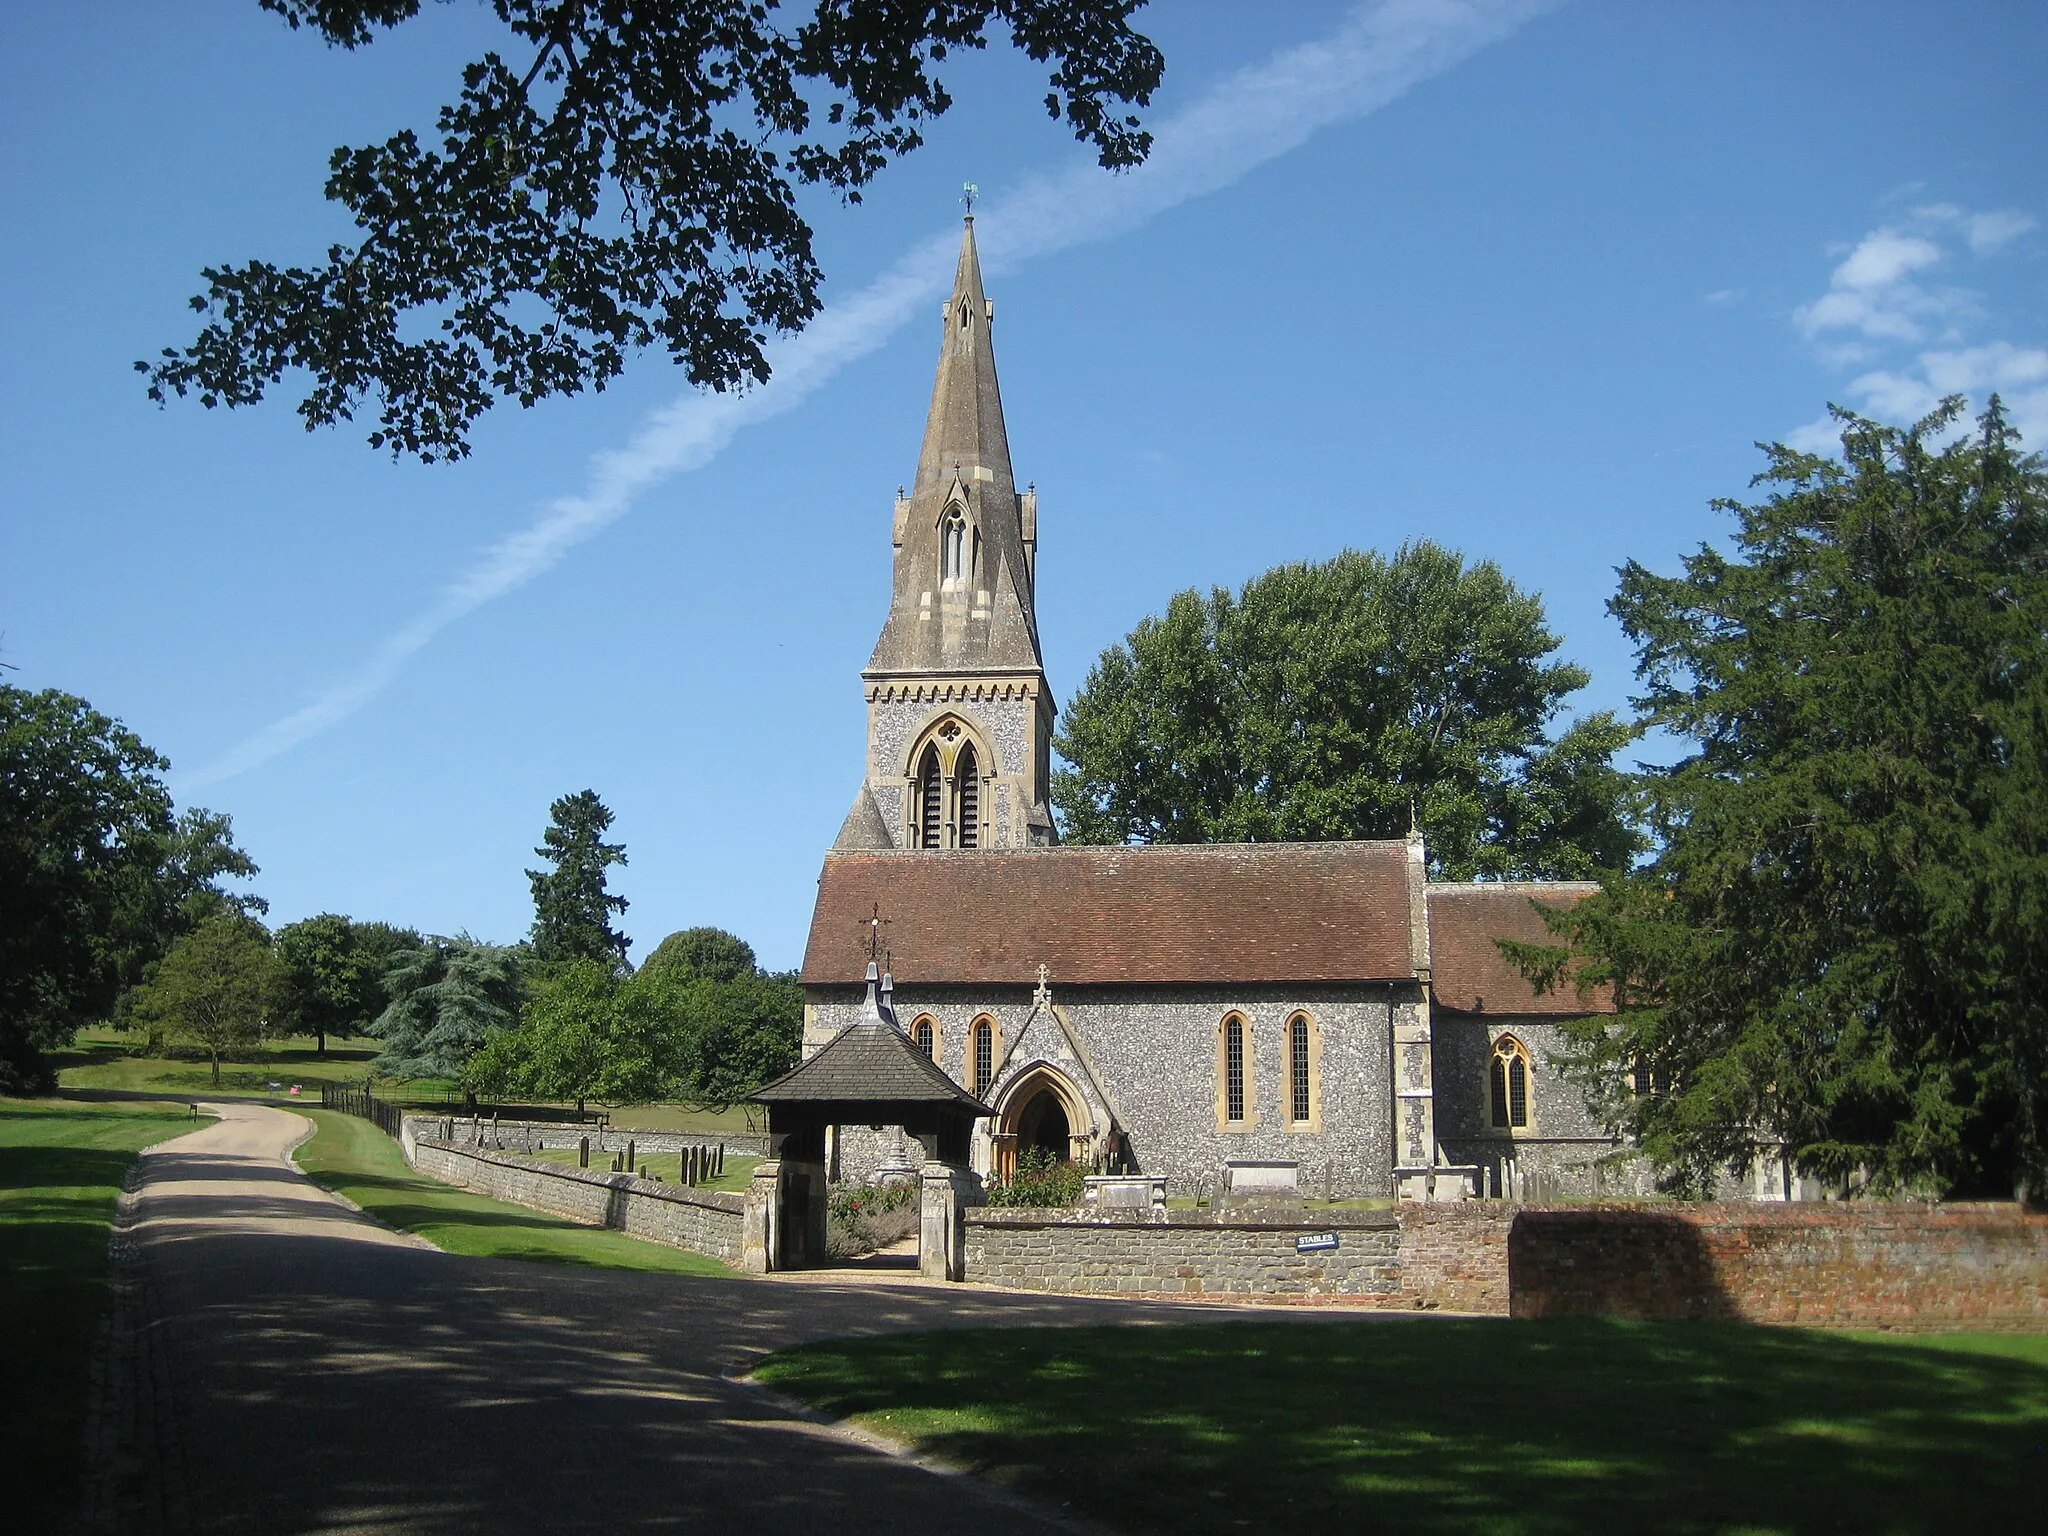 Photo showing: St Mark's parish church, Englefield, Berkshire, seen from the southeast.
This view of the church can be seen in the Agatha Christie's Poirot episode "Taken at the Flood" (2006).